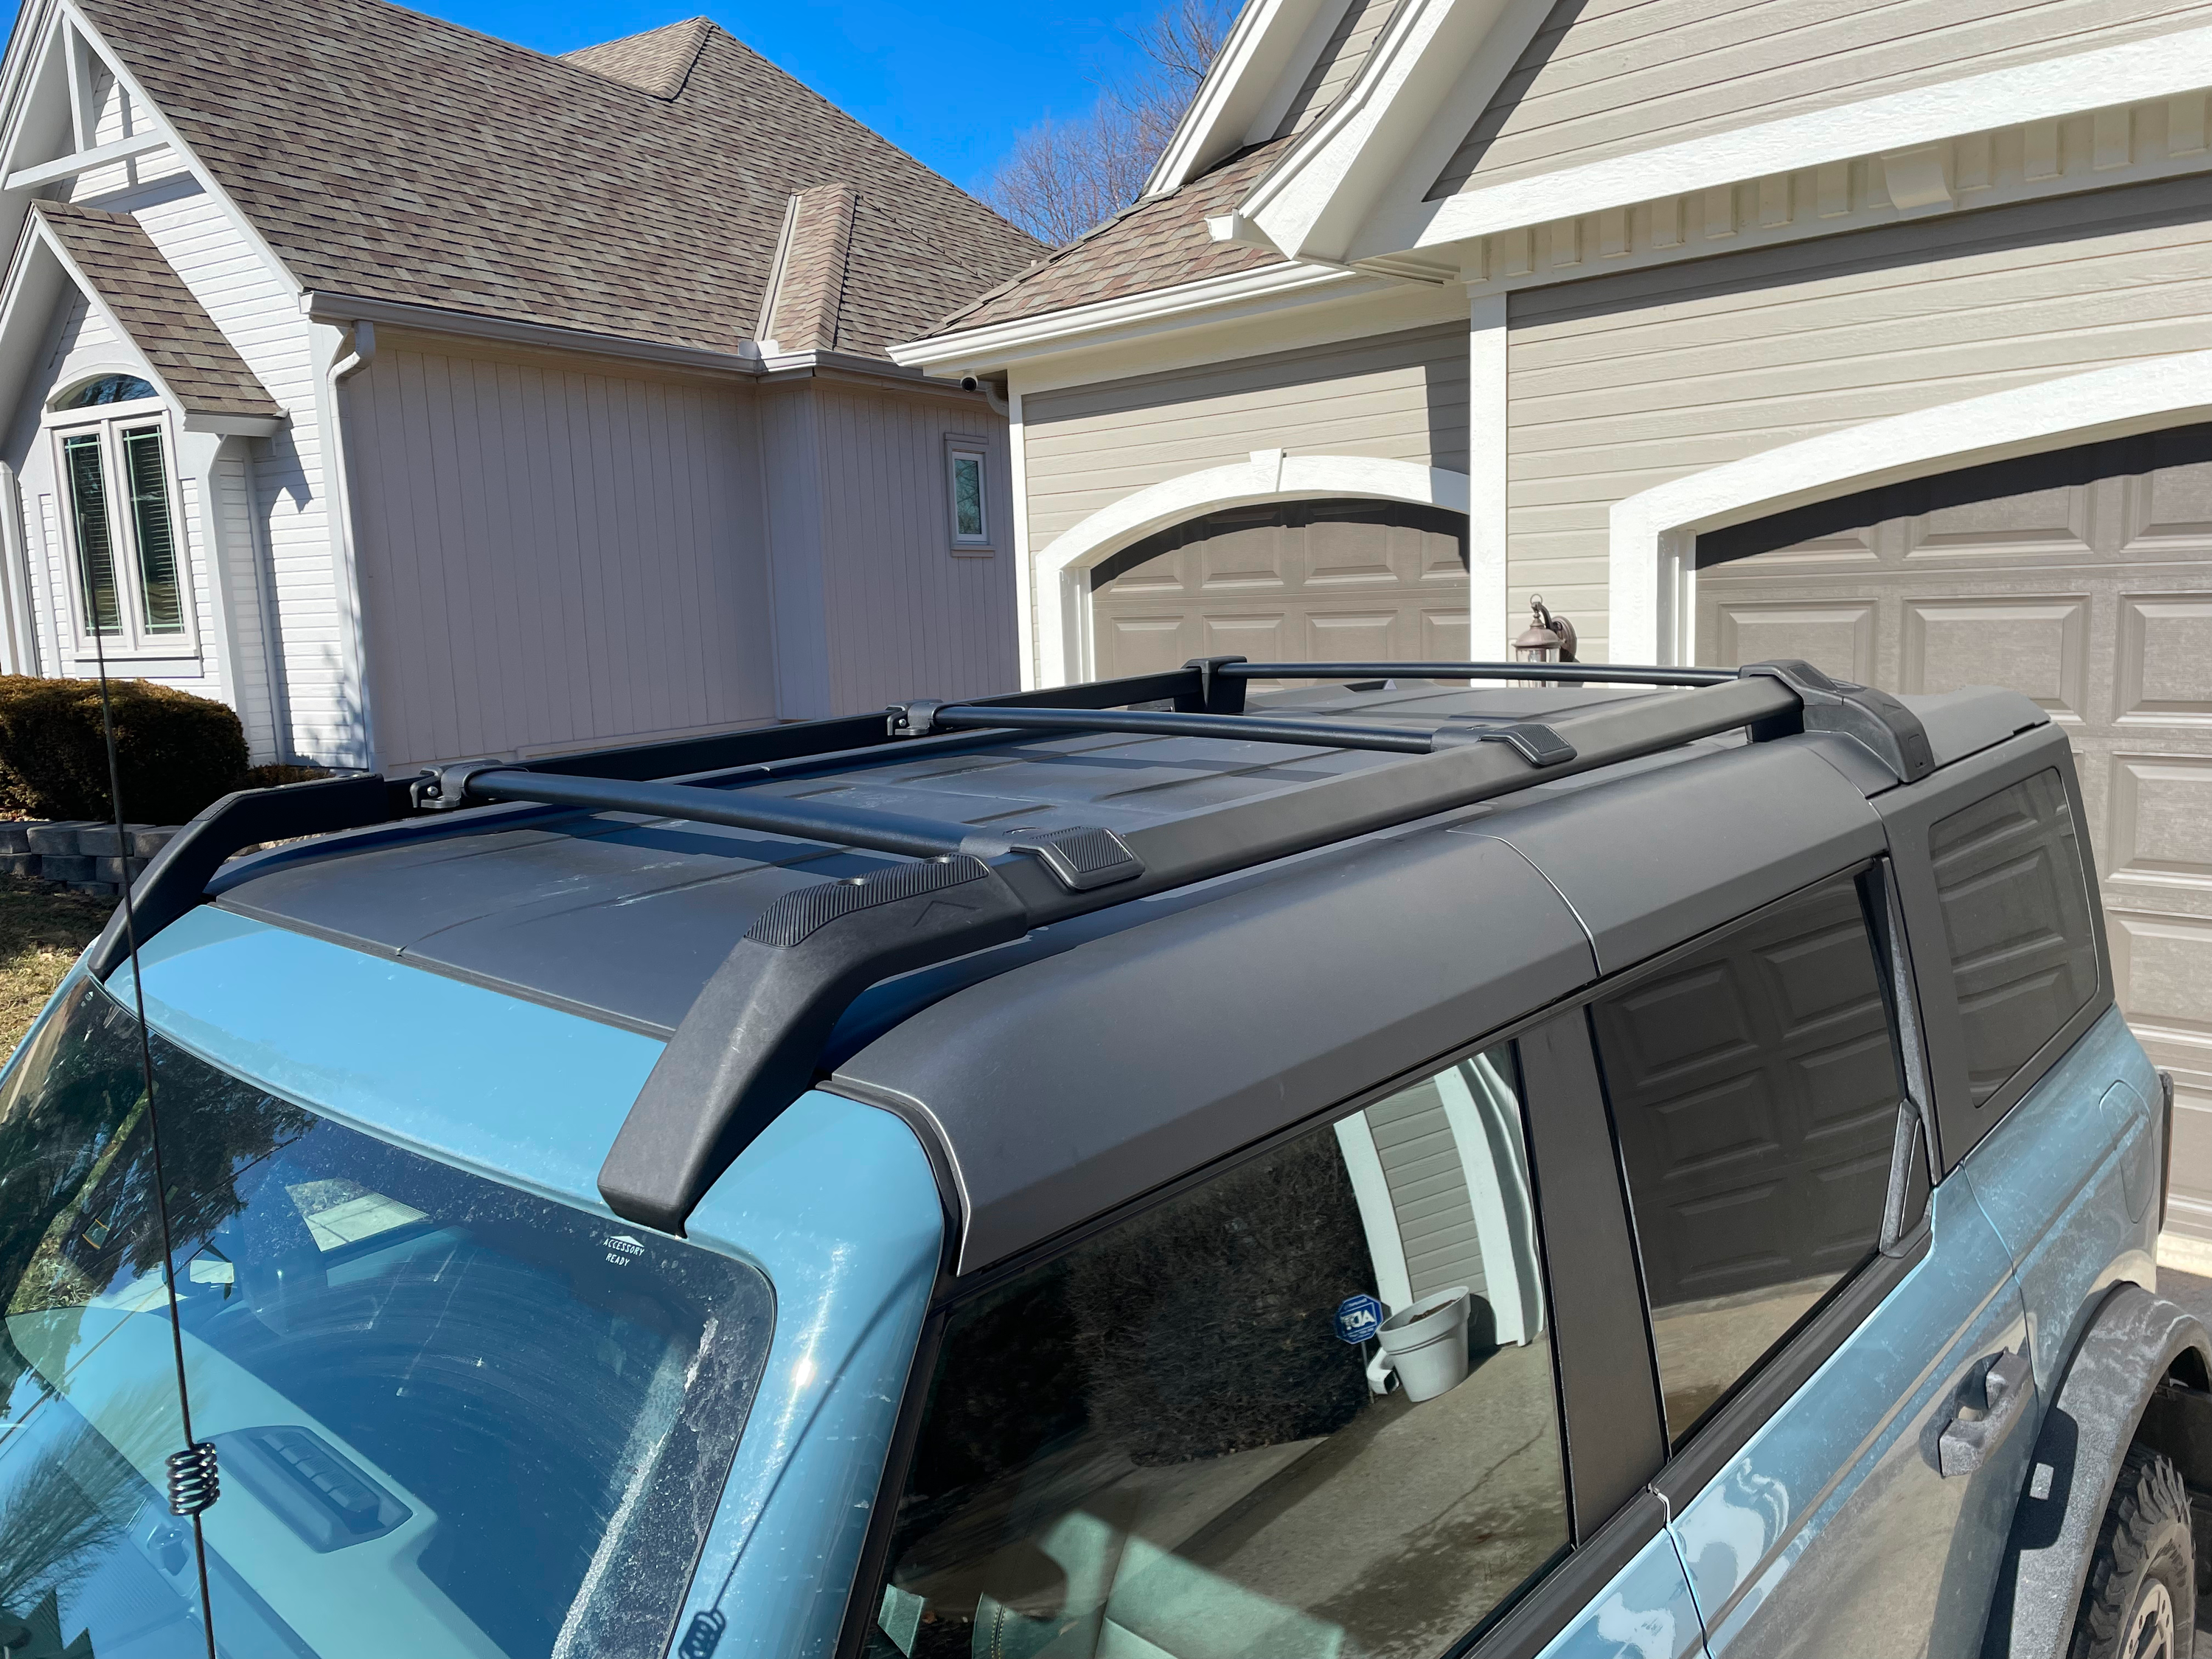 Ford Bronco Broaddict Roof Rack Review IMG_2854